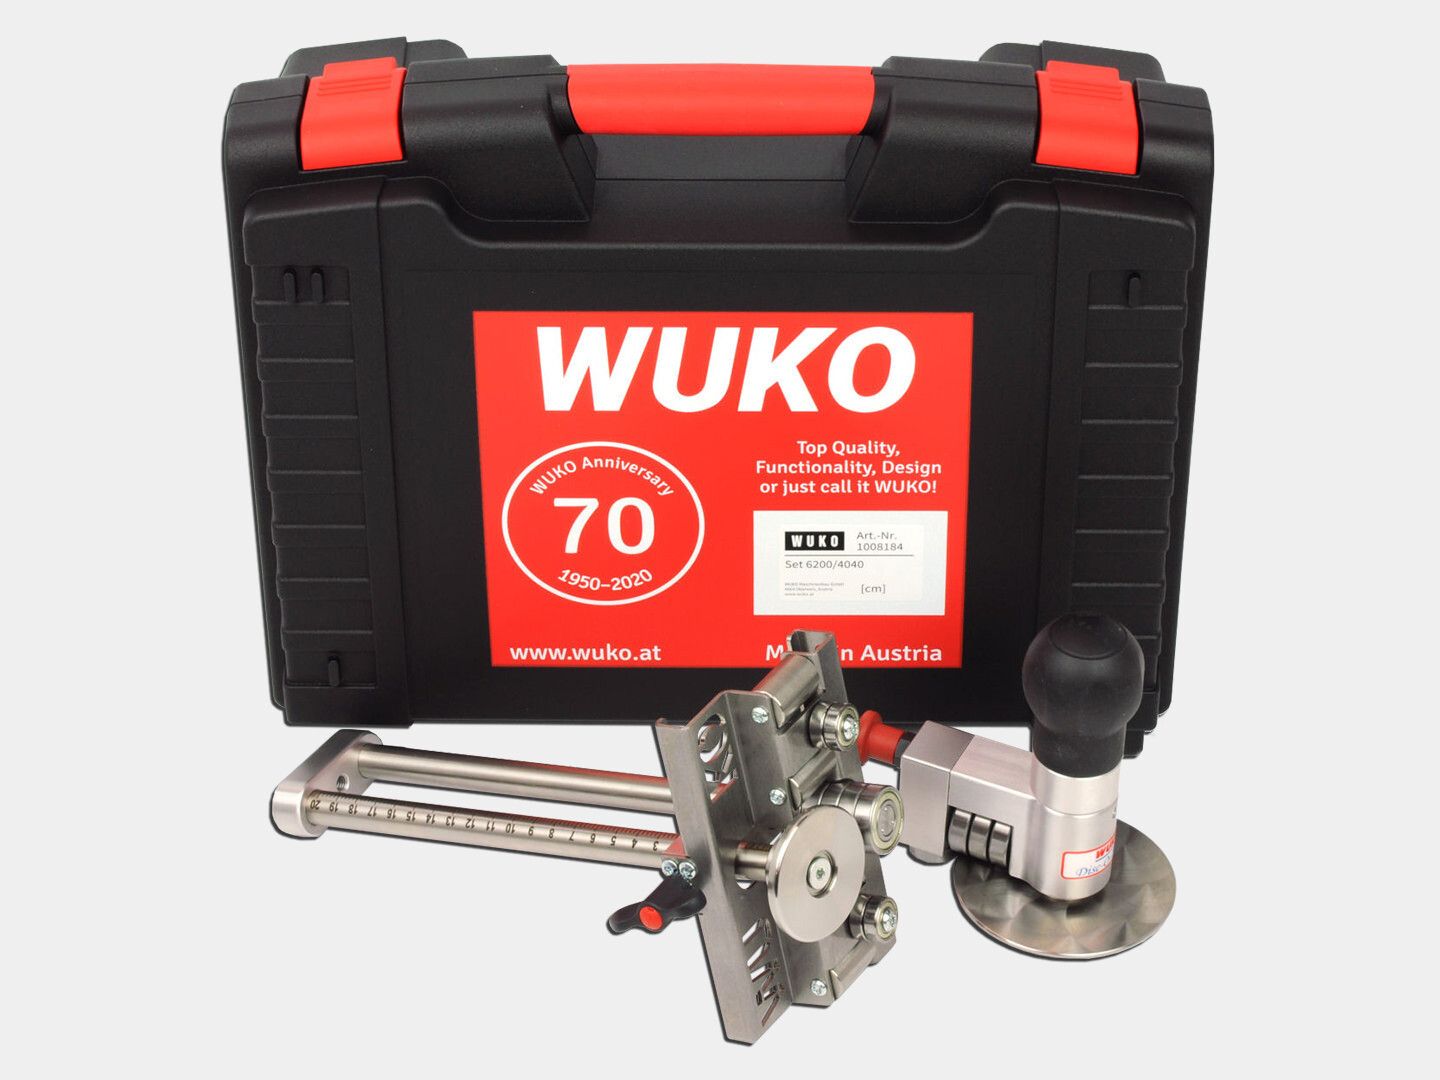 Wuko Bender Set 6200/4040 with Carrying Case